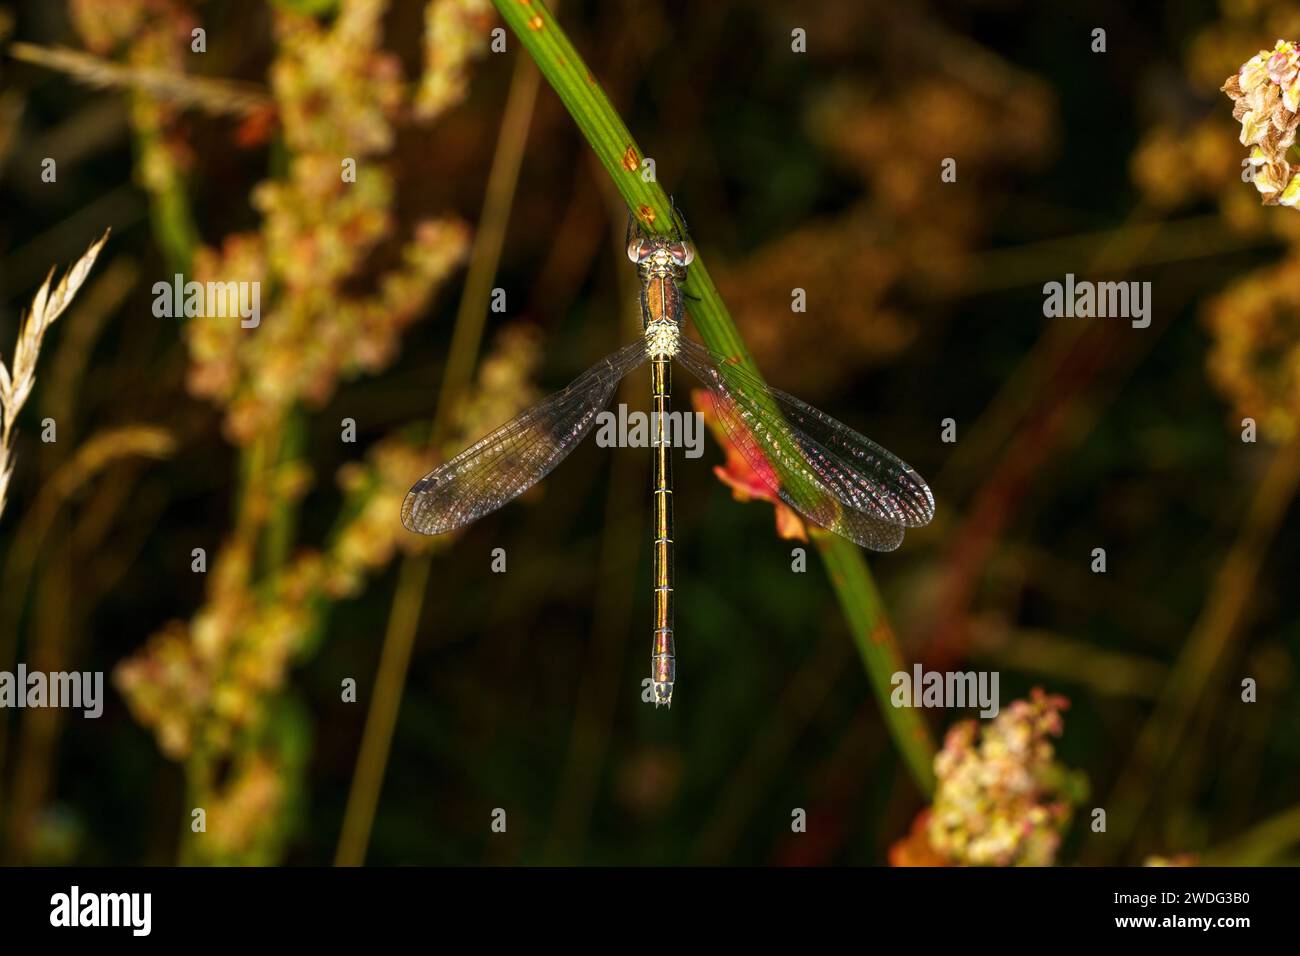 Lestes dryas Family Lestidae Genus Lestes Nothern emerald spreadwing damselfly wild nature insect wallpaper Stock Photo